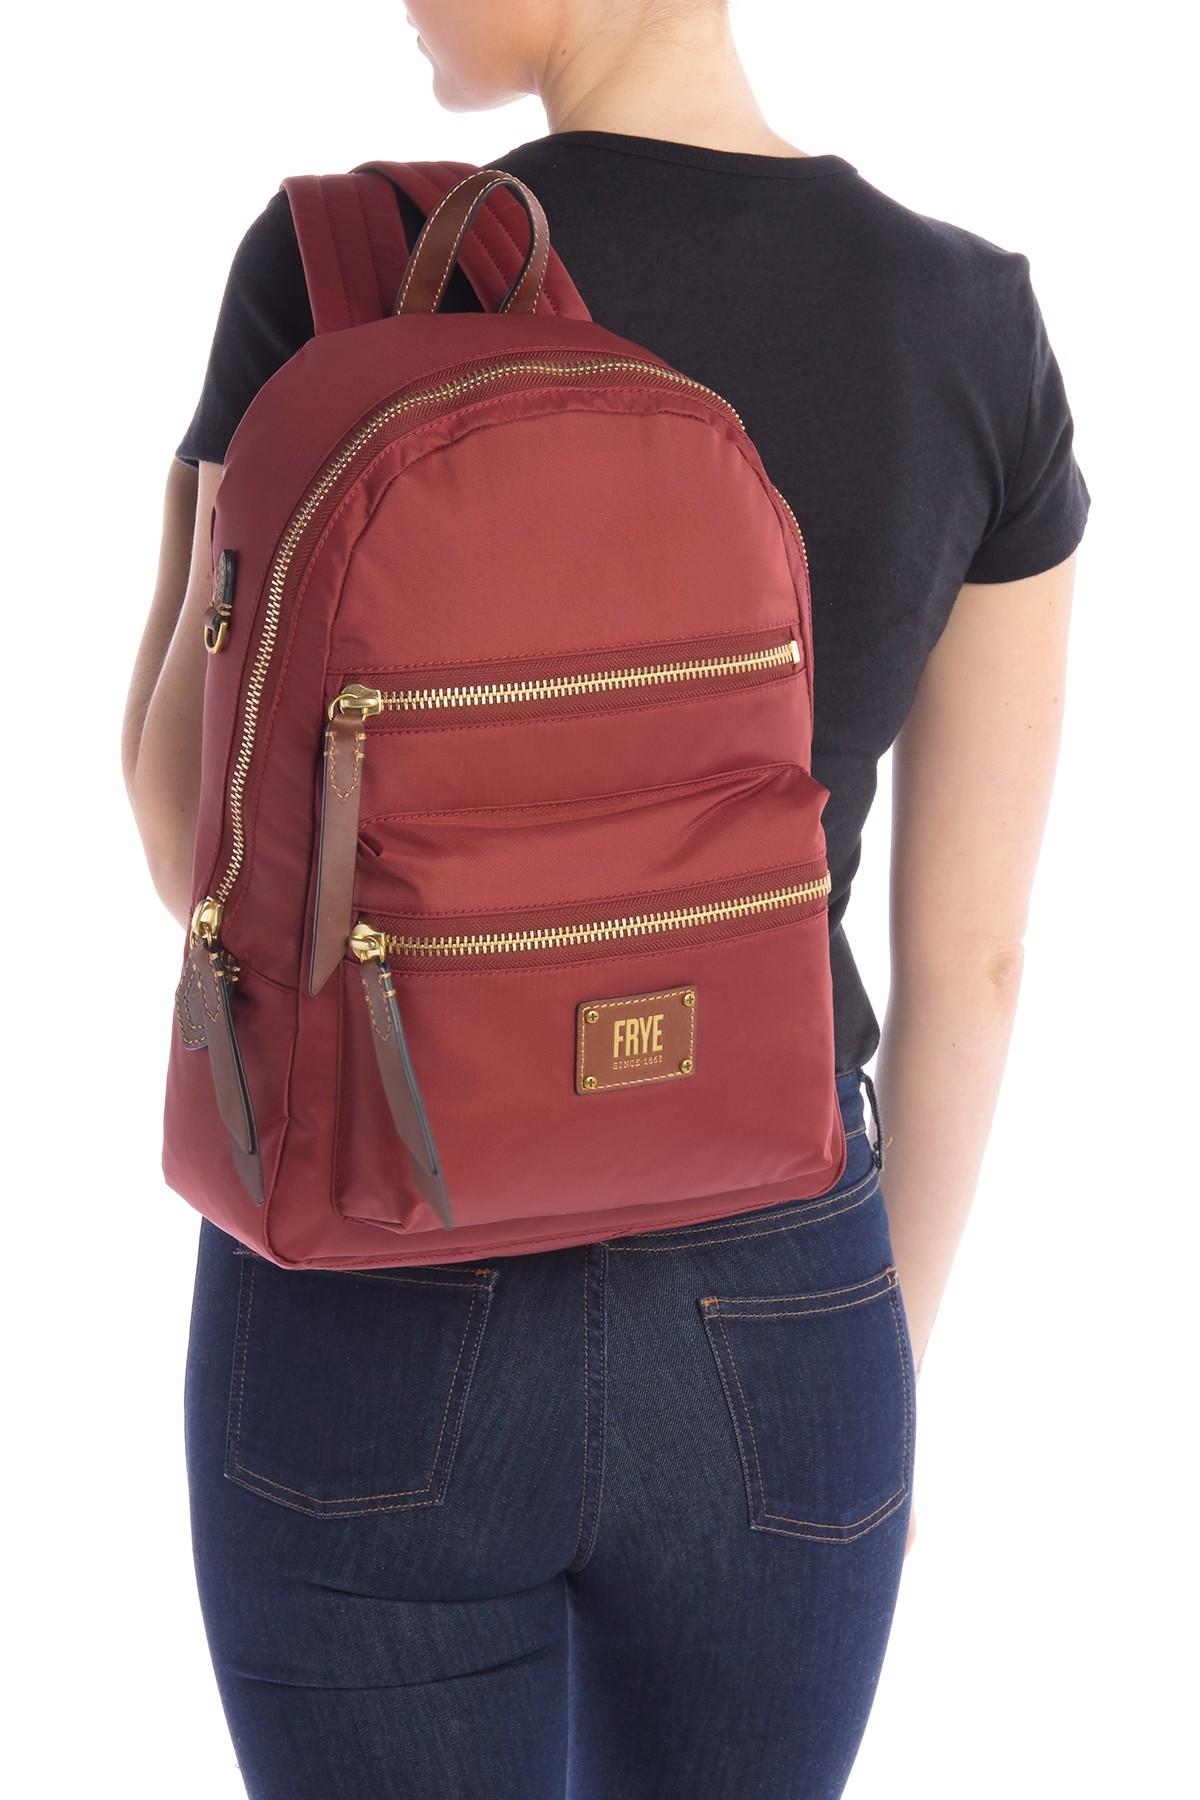 Lyst - Frye Ivy Nylon School Backpack in Red - Save 20%